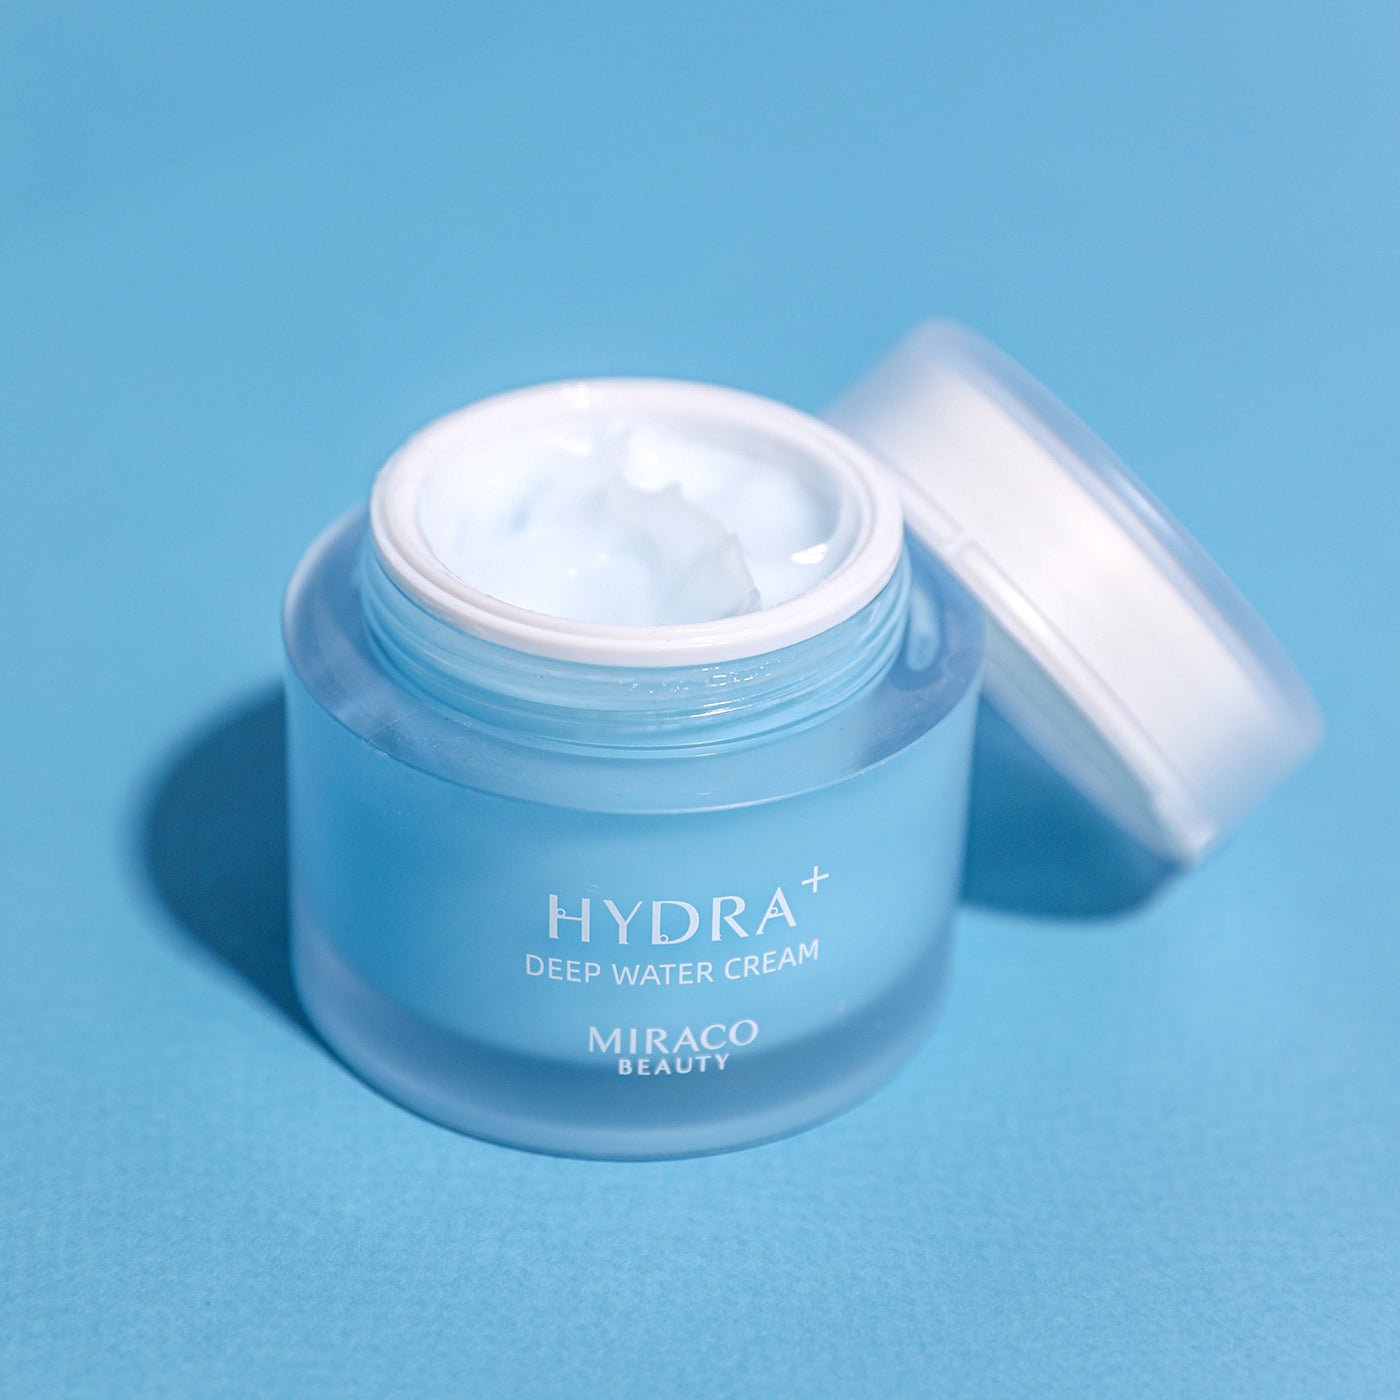  Hydra+ Deep Water Cream with texture of the cream on a light blue background